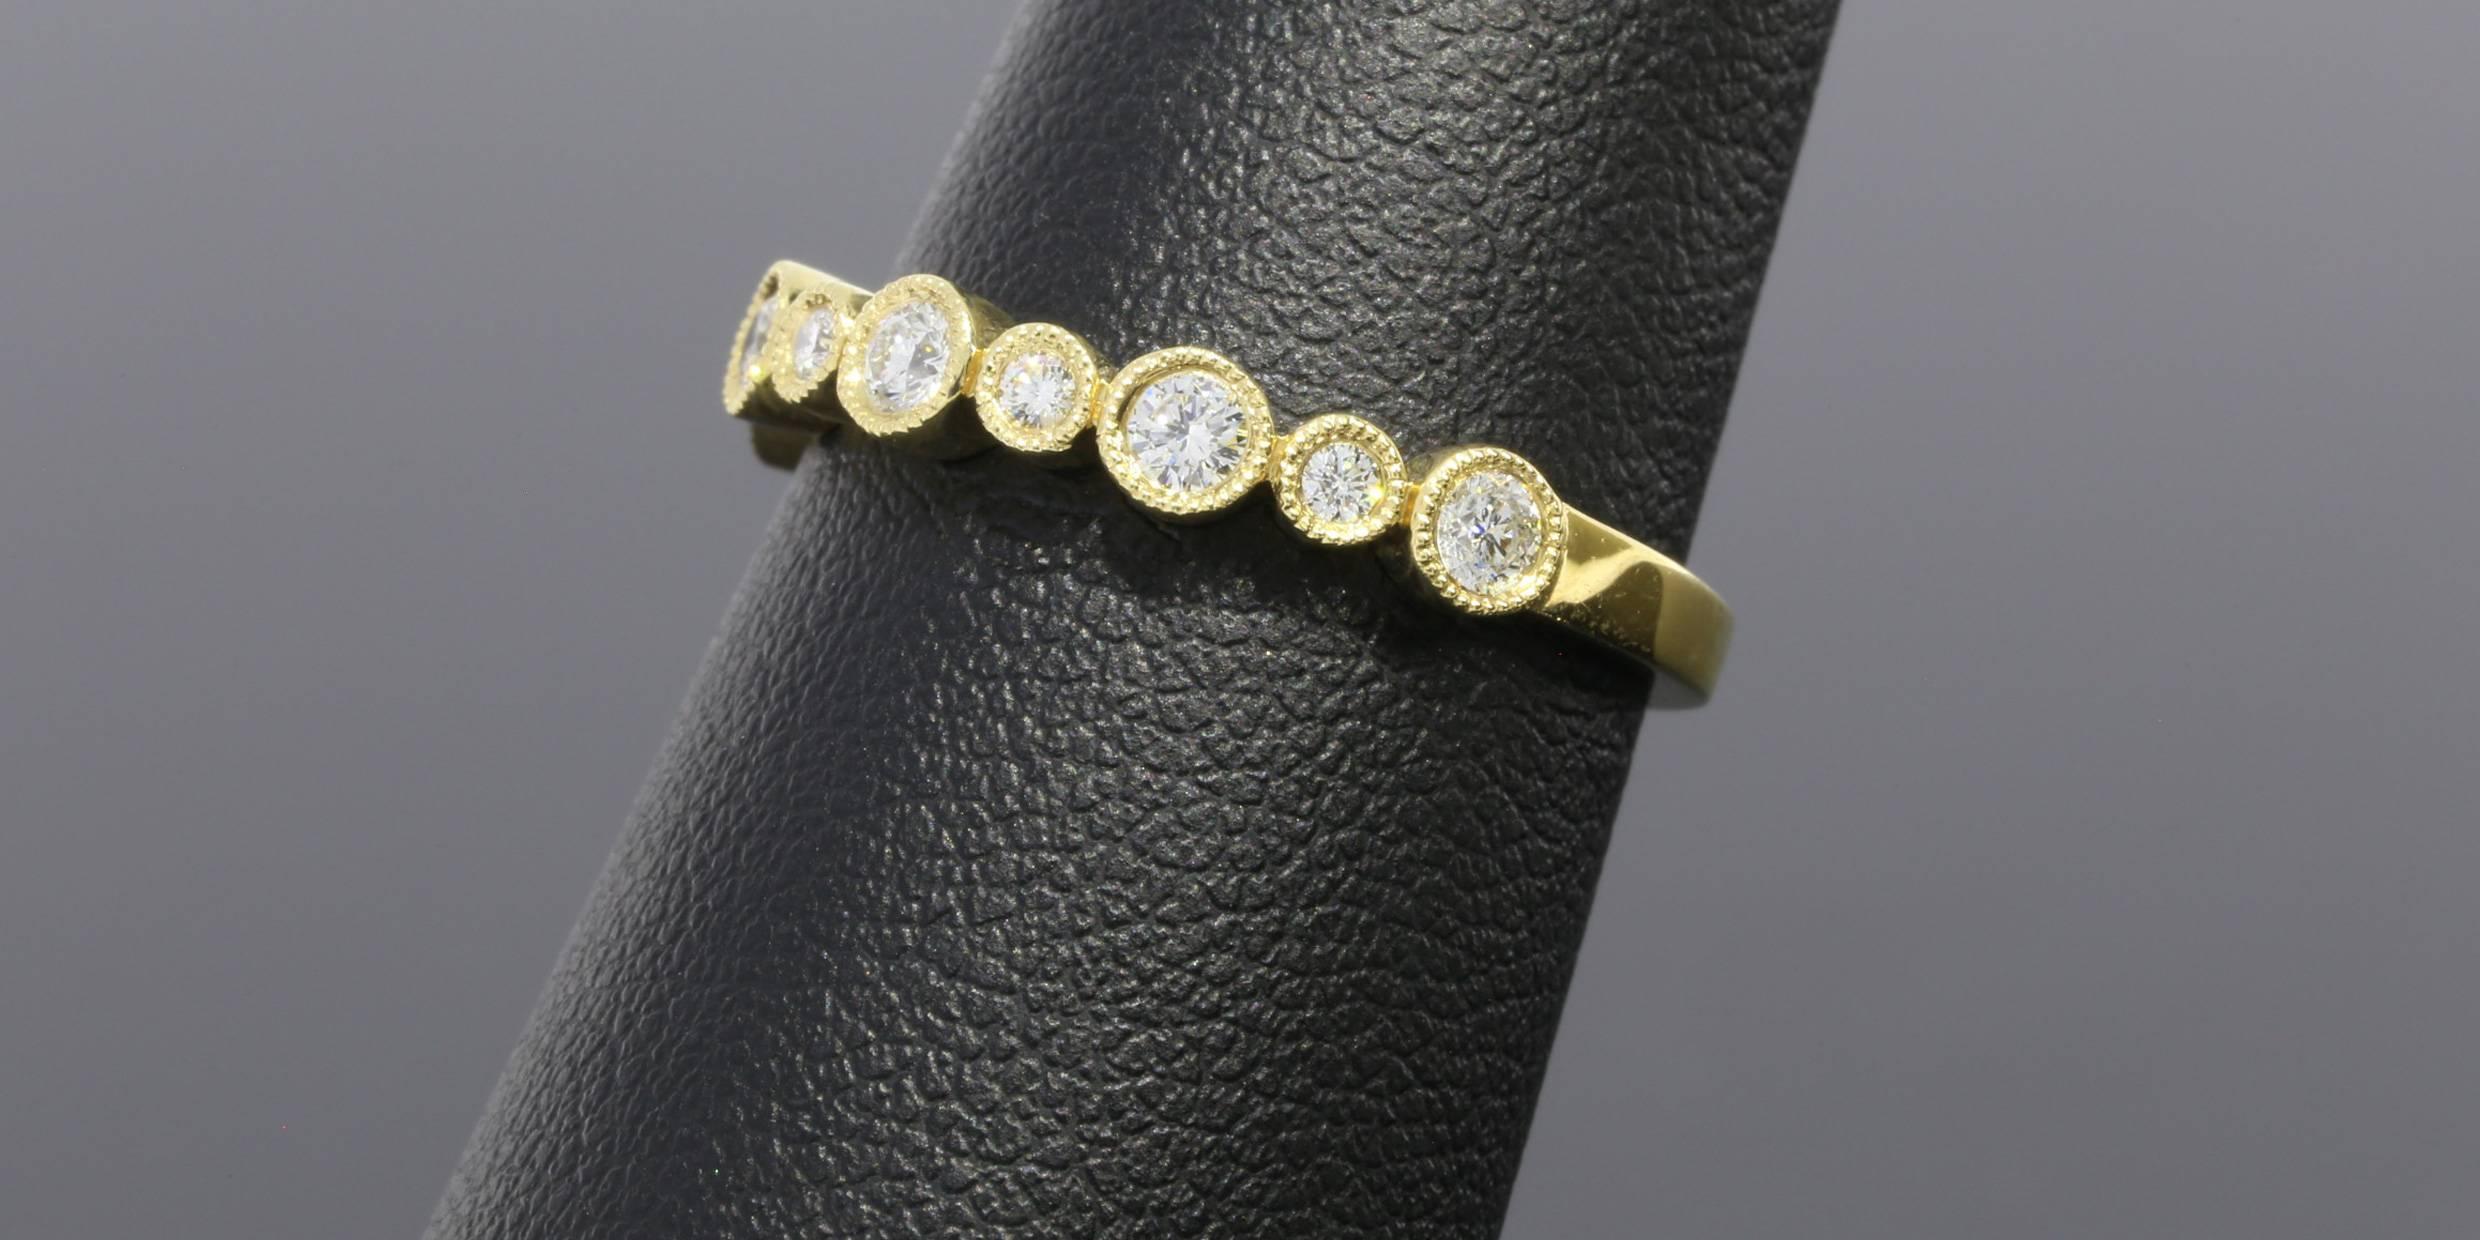 This classic band is a beautiful 14 karat yellow gold diamond band that can dress up any ring. It can be used as a wedding band, stand alone band, or stack ring. The ring has 9 round brilliant cut diamonds that have a combined total weight of .32